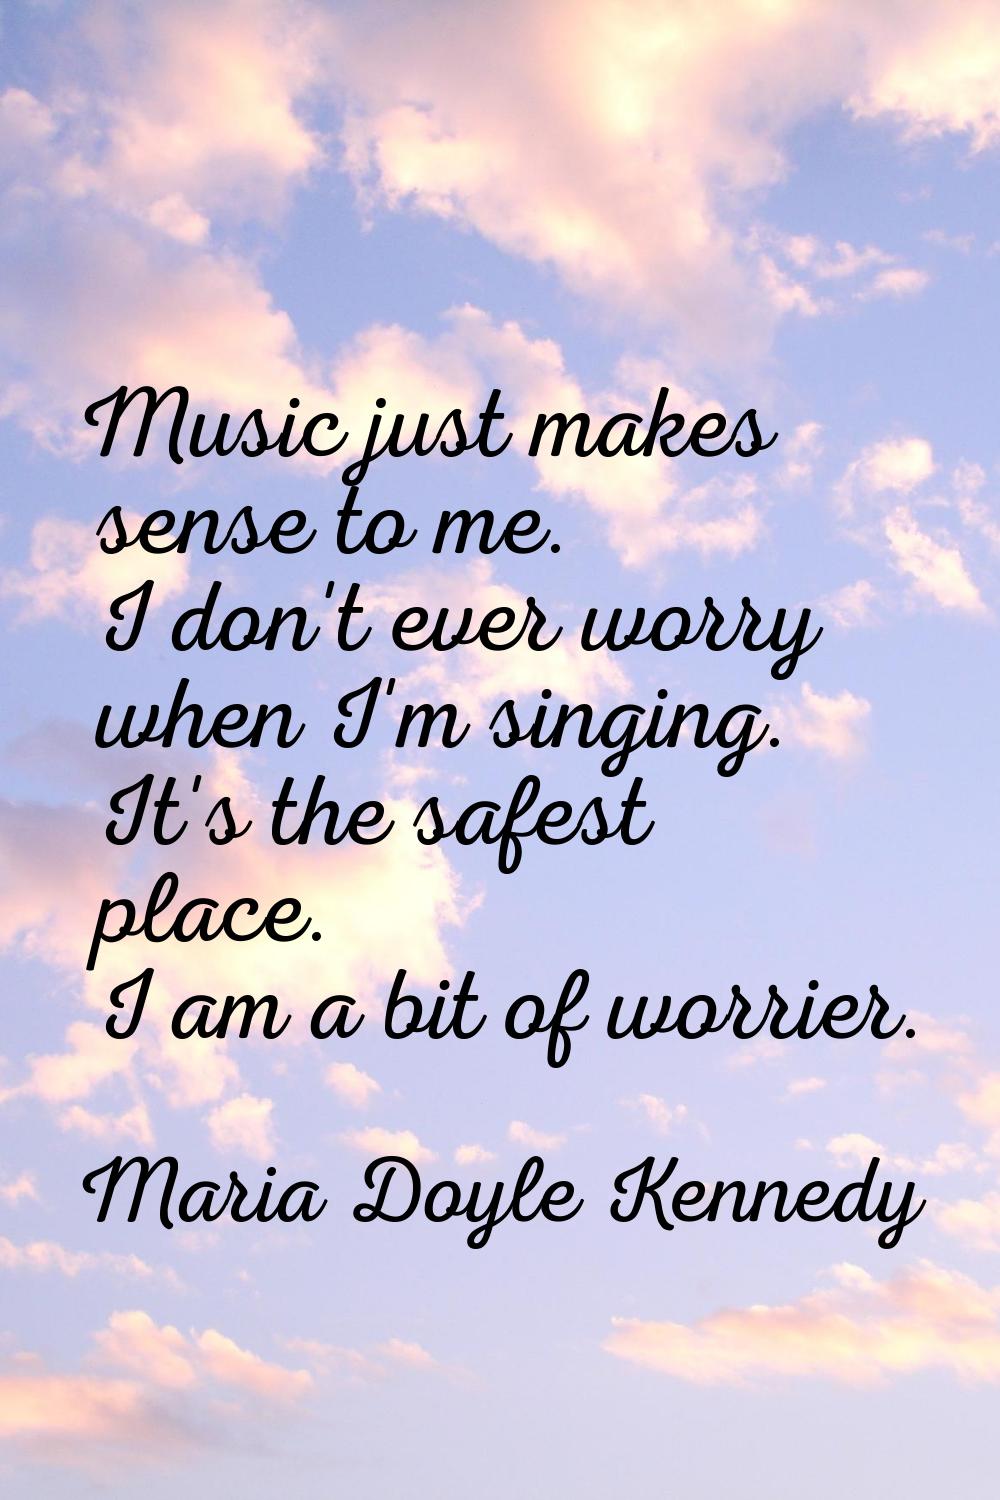 Music just makes sense to me. I don't ever worry when I'm singing. It's the safest place. I am a bi